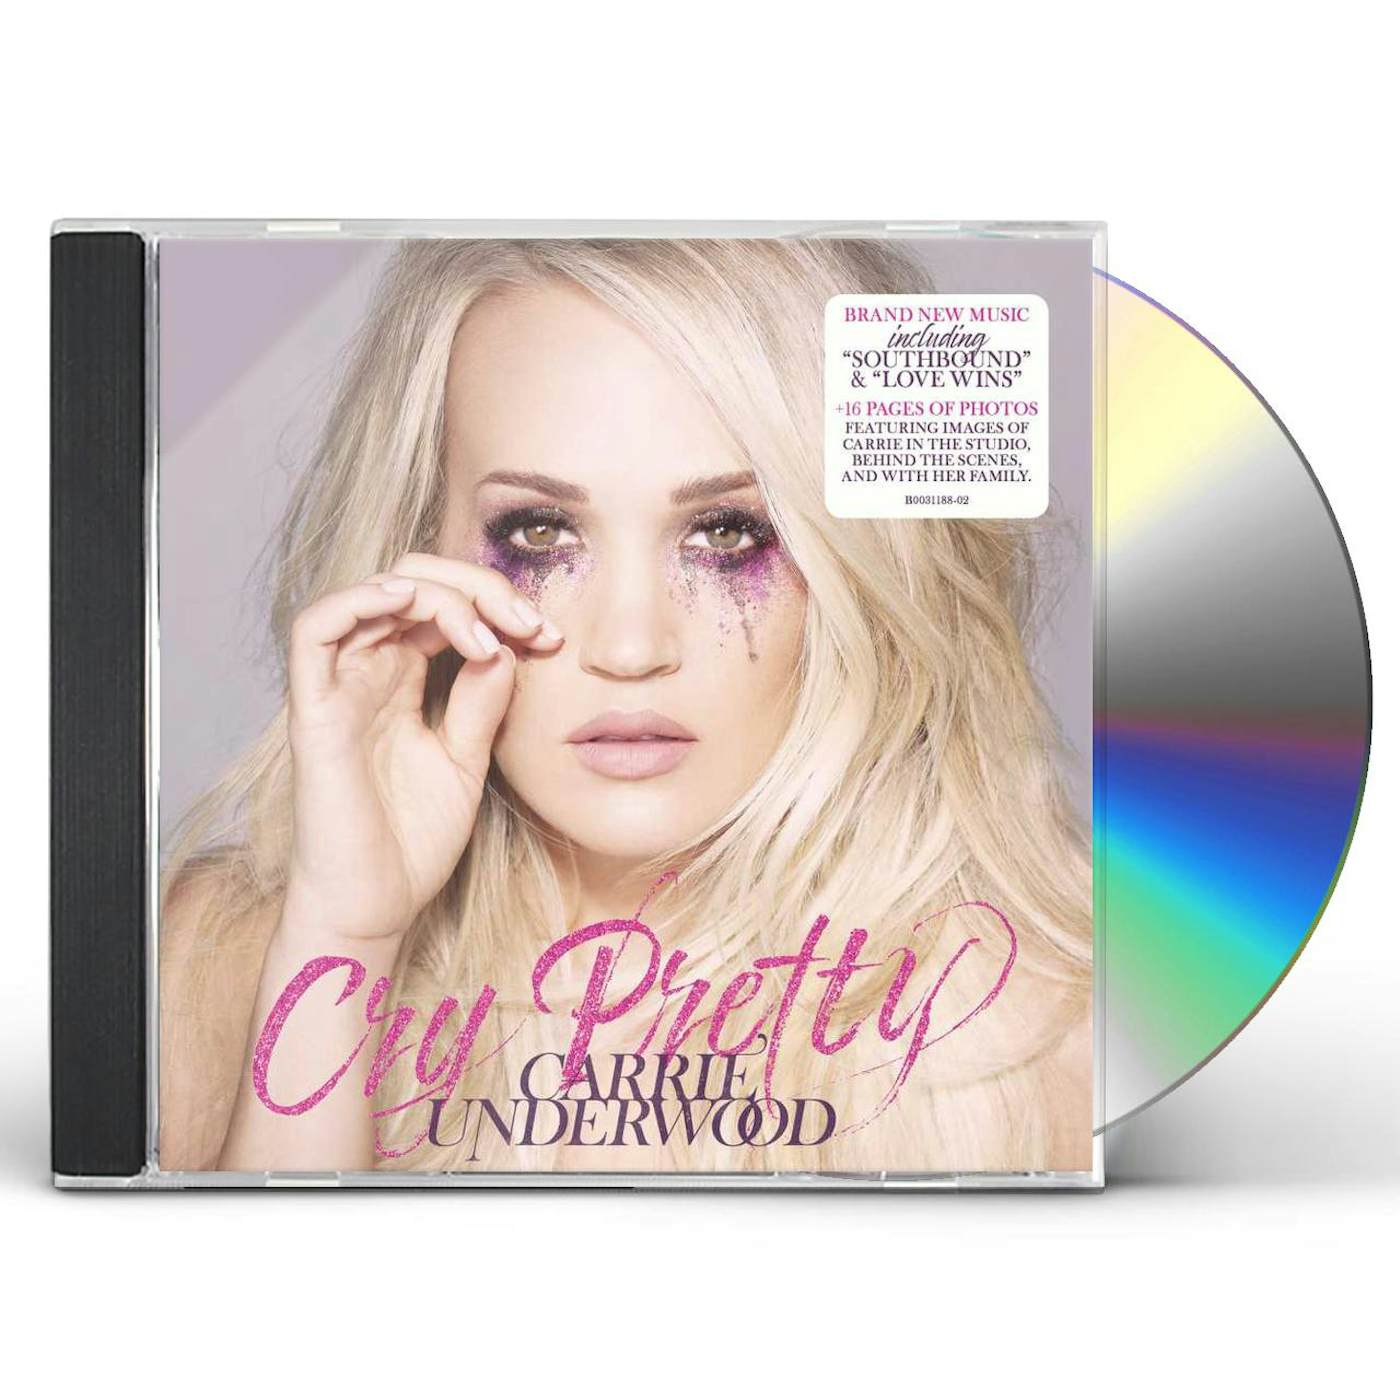 Carrie Underwood CRY PRETTY (PICUTRE BOOK CD) CD